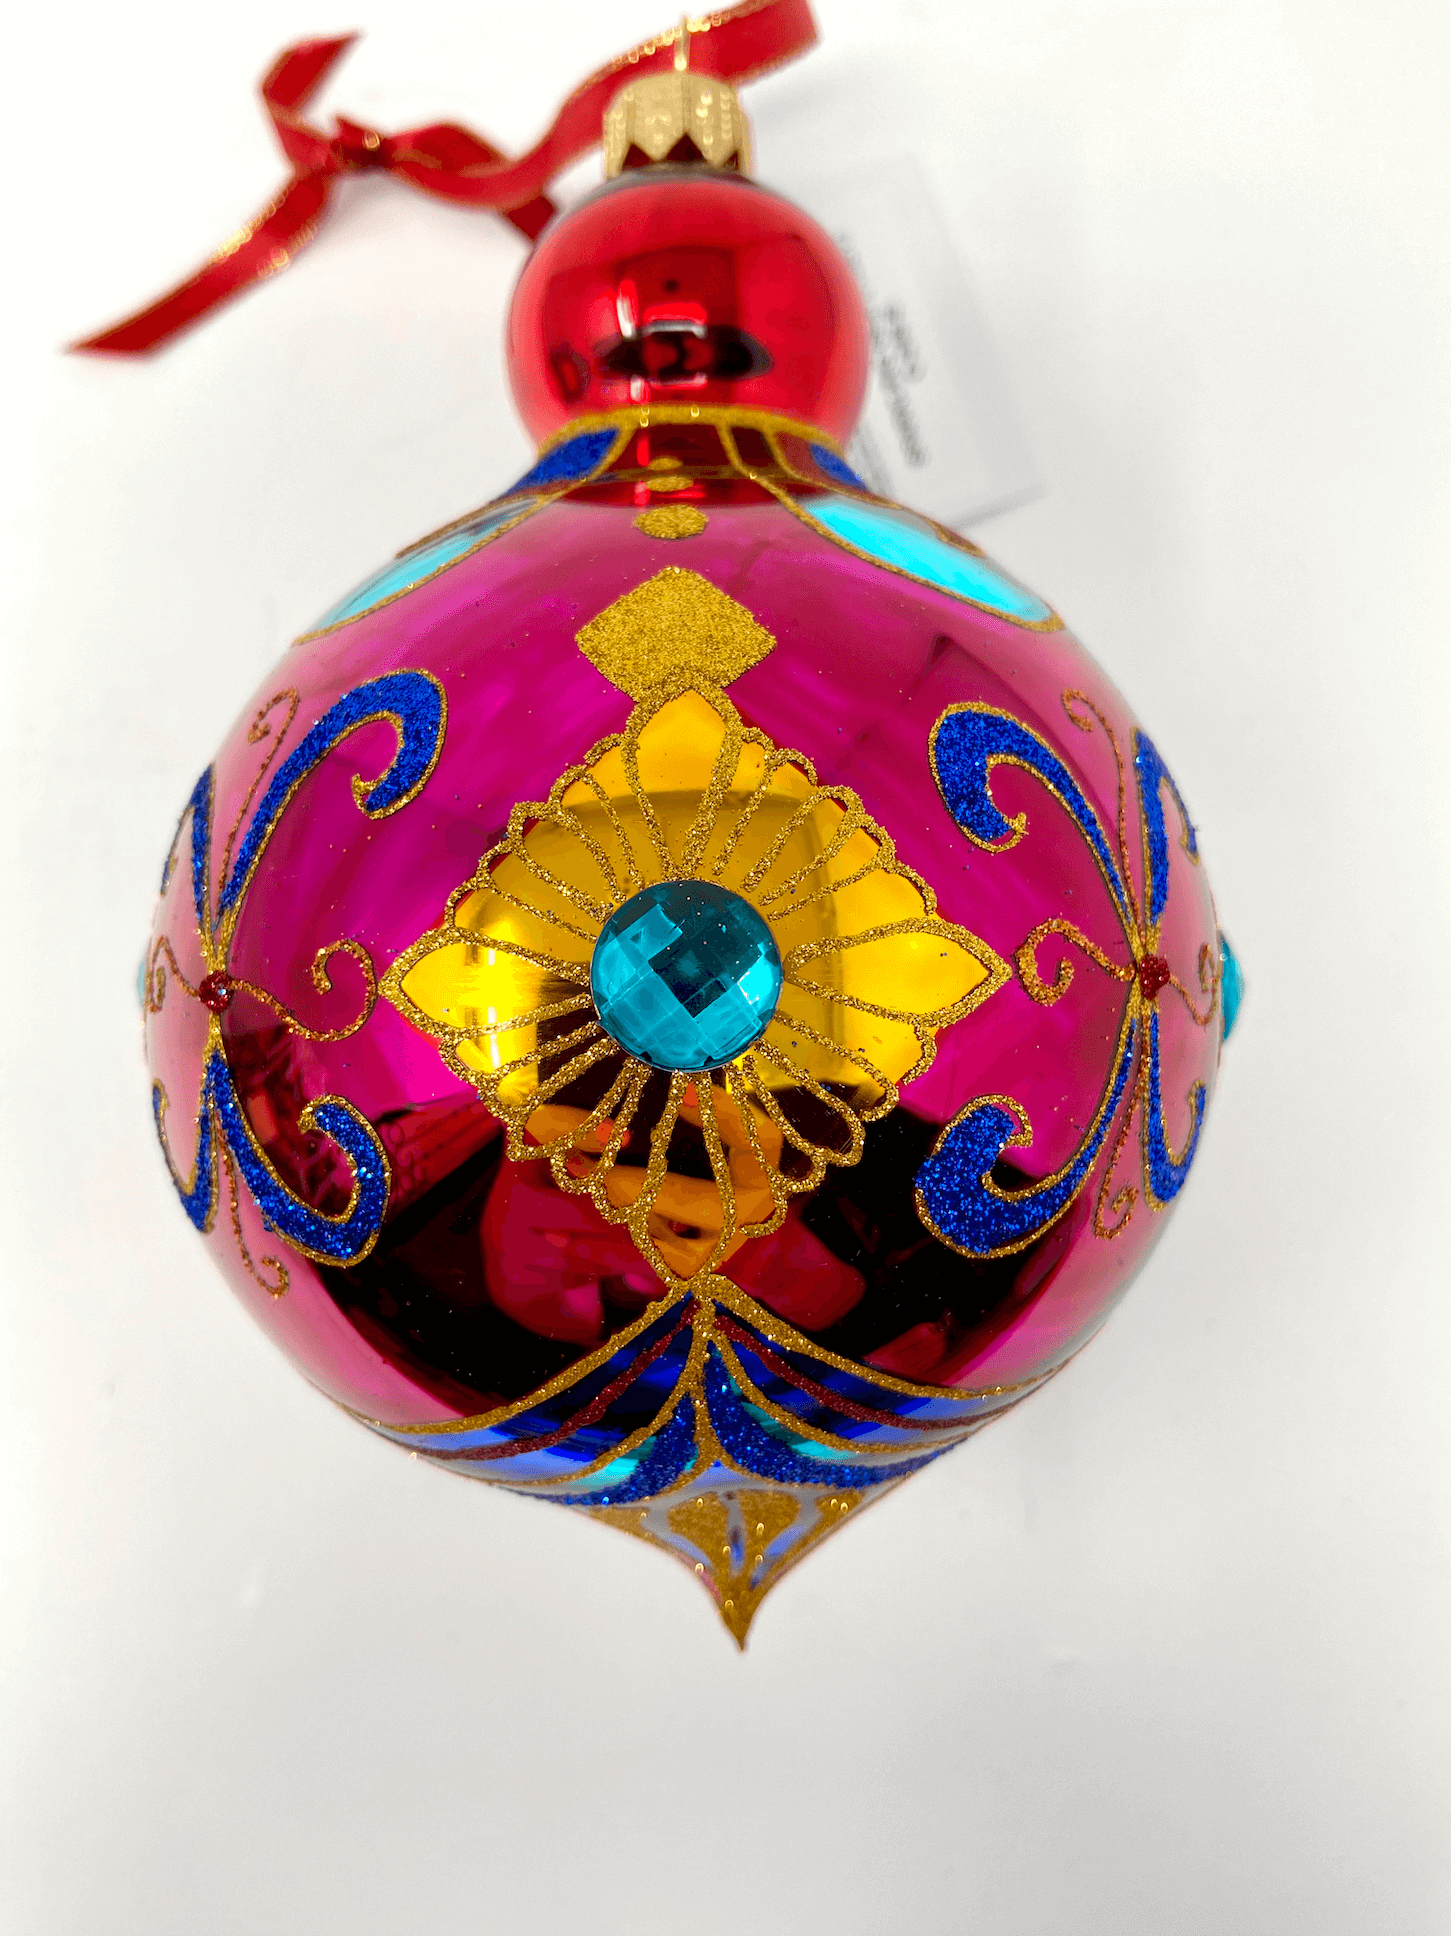 Gorgeously intricately detailed colorful polish glass ornament with gold detailing and colorful accents.